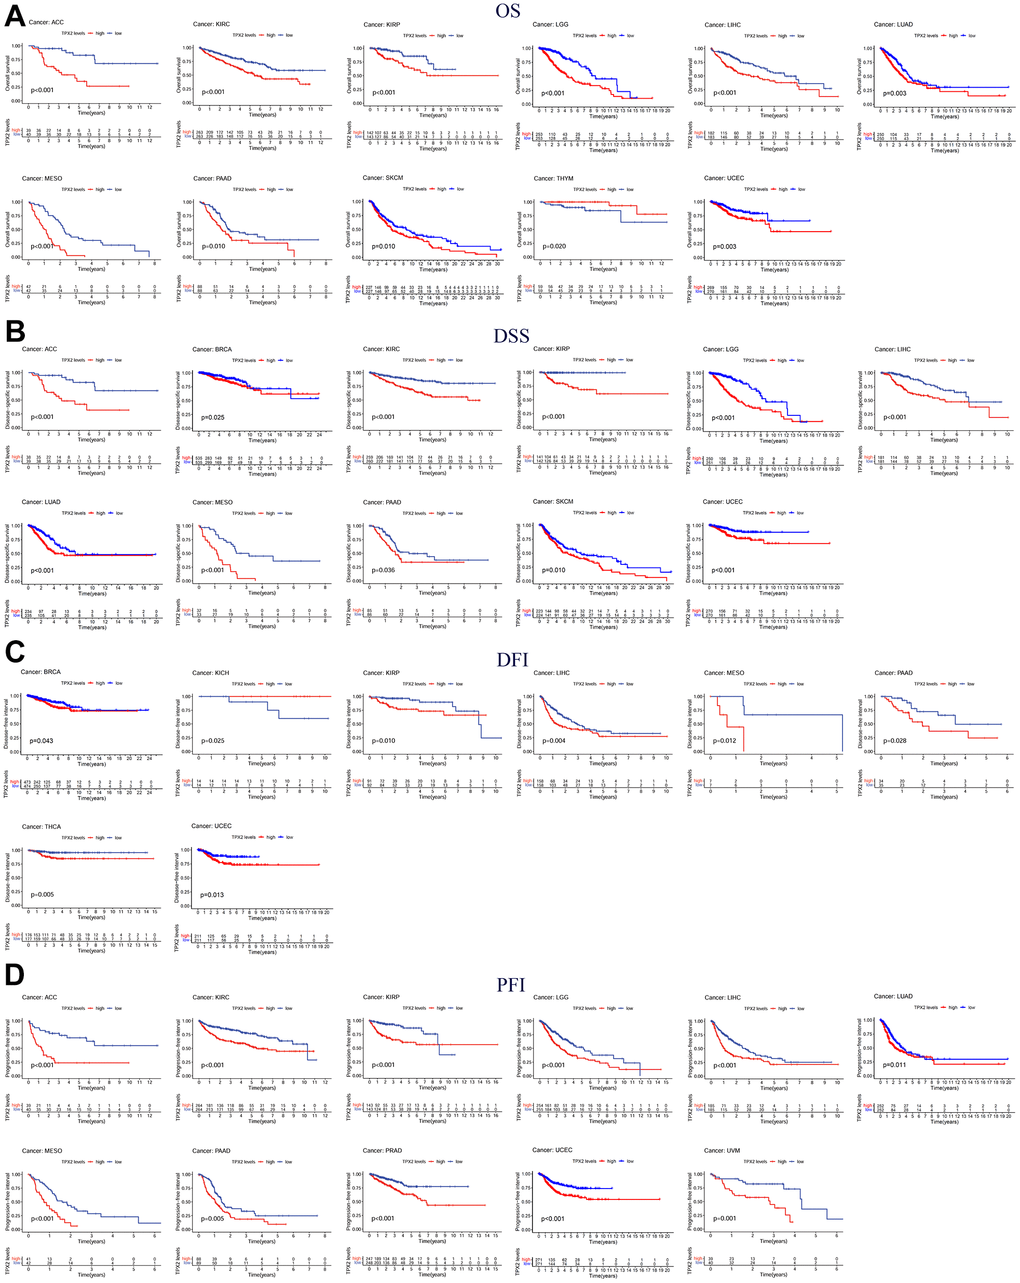 Kaplan-Meier survival curves comparing the expression of TPX2 in pan-cancer from the TCGA database. (A) Kaplan–Meier OS curves of TPX2 in 11 cancer types; (B) Kaplan–Meier DSS curves of TPX2 in 11 cancer types; (C) Kaplan–Meier DFI curves of TPX2 in 8 cancer types; (D) Kaplan–Meier PFI curves of TPX2 in 11 cancer types. p-value 